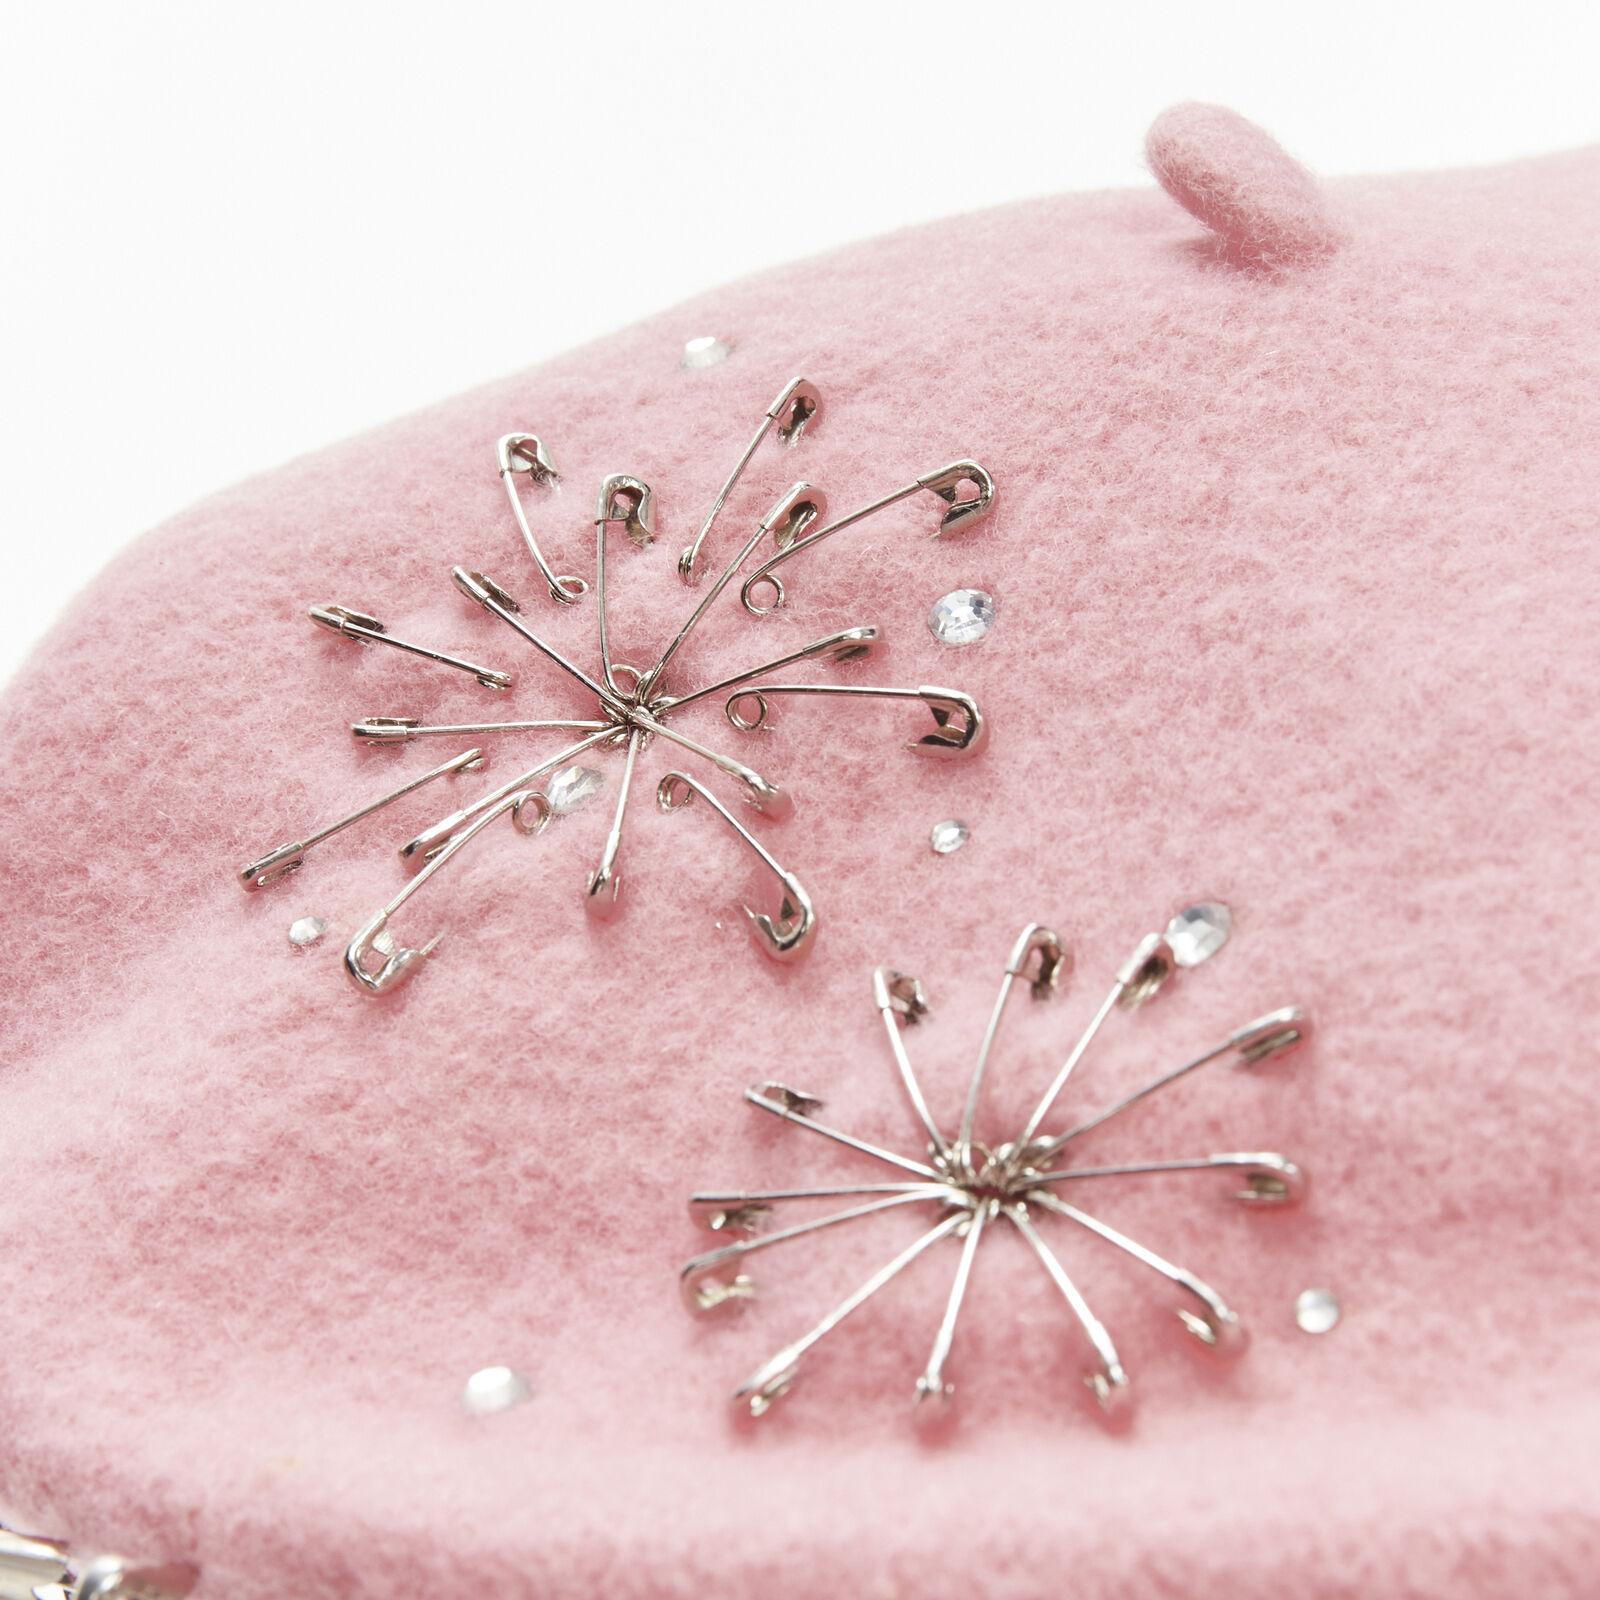 new MISS JONES Stephen Jones Pins candy pink wool safety pin crystal beret hat
Reference: ANWU/A00871
Brand: Stephen Jones
Material: 100% Wool
Color: Pink
Extra Details: Safetypin and rhinestone embellishments.
Made in: United